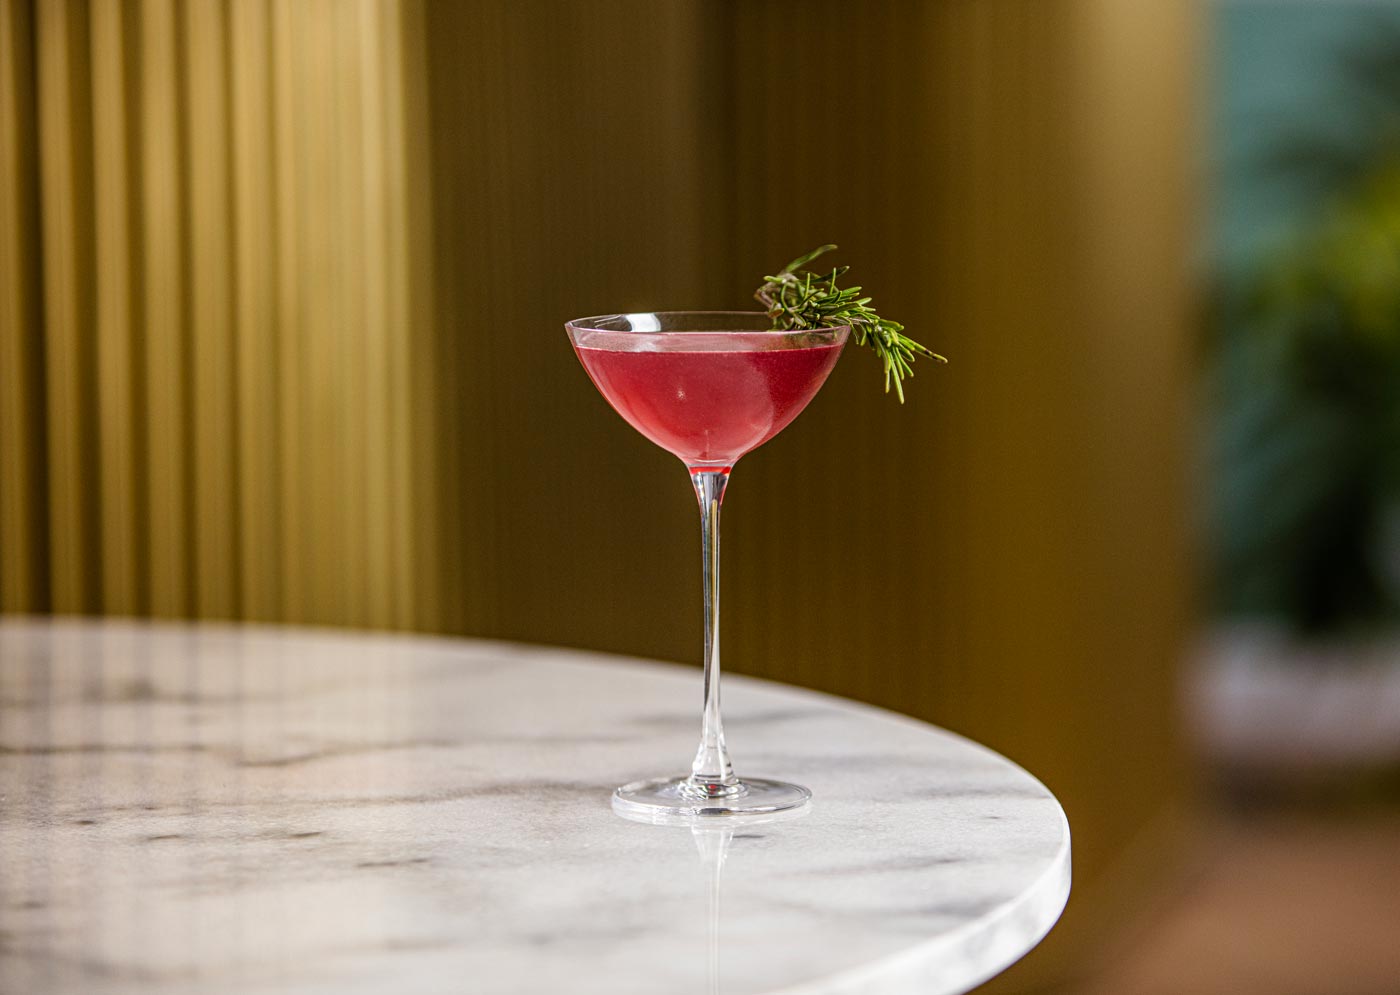 A small coupe glass is placed on the egde of a marble table. The glass contains a red drink and it topped with a sprig of rosemary.